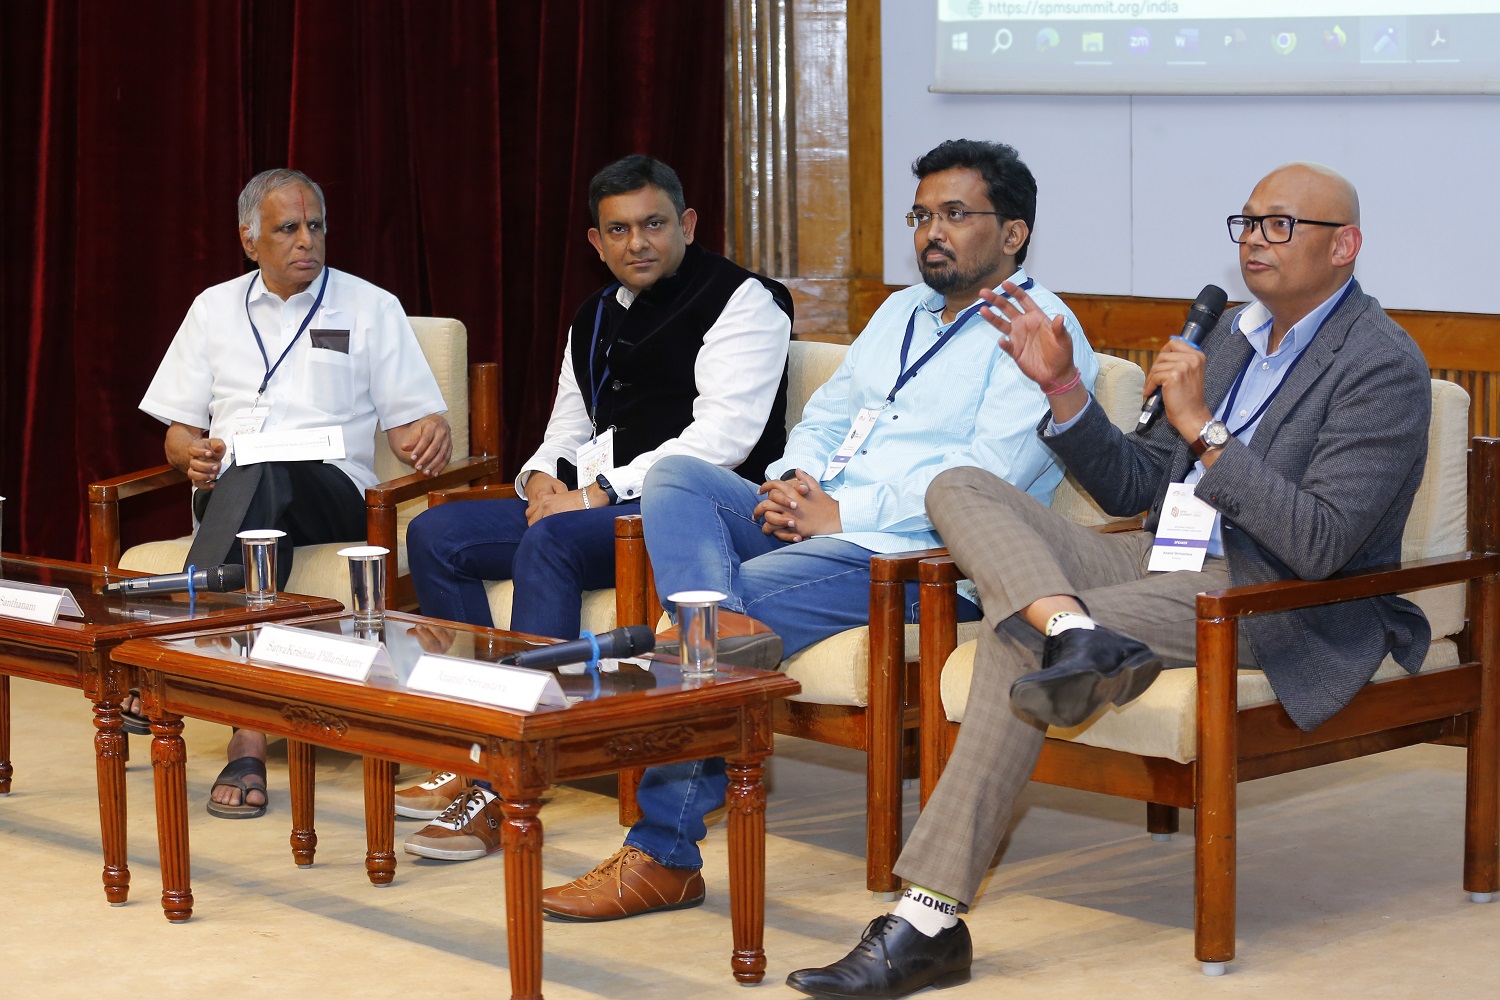 Prof. S. Sadagopan moderates the panel discussion on, 'Emergence and Sustainability of Non-AI Solutions in AI World'. (L-R) Prof. S. Sadagopan; Srivatsan Santhanam, VP, Spend Management, SAP; SatyaKrishna Pillarishetty, Principal PM, Oracle Health and AI, and Anand Srivastava, Head Products, Genesys.